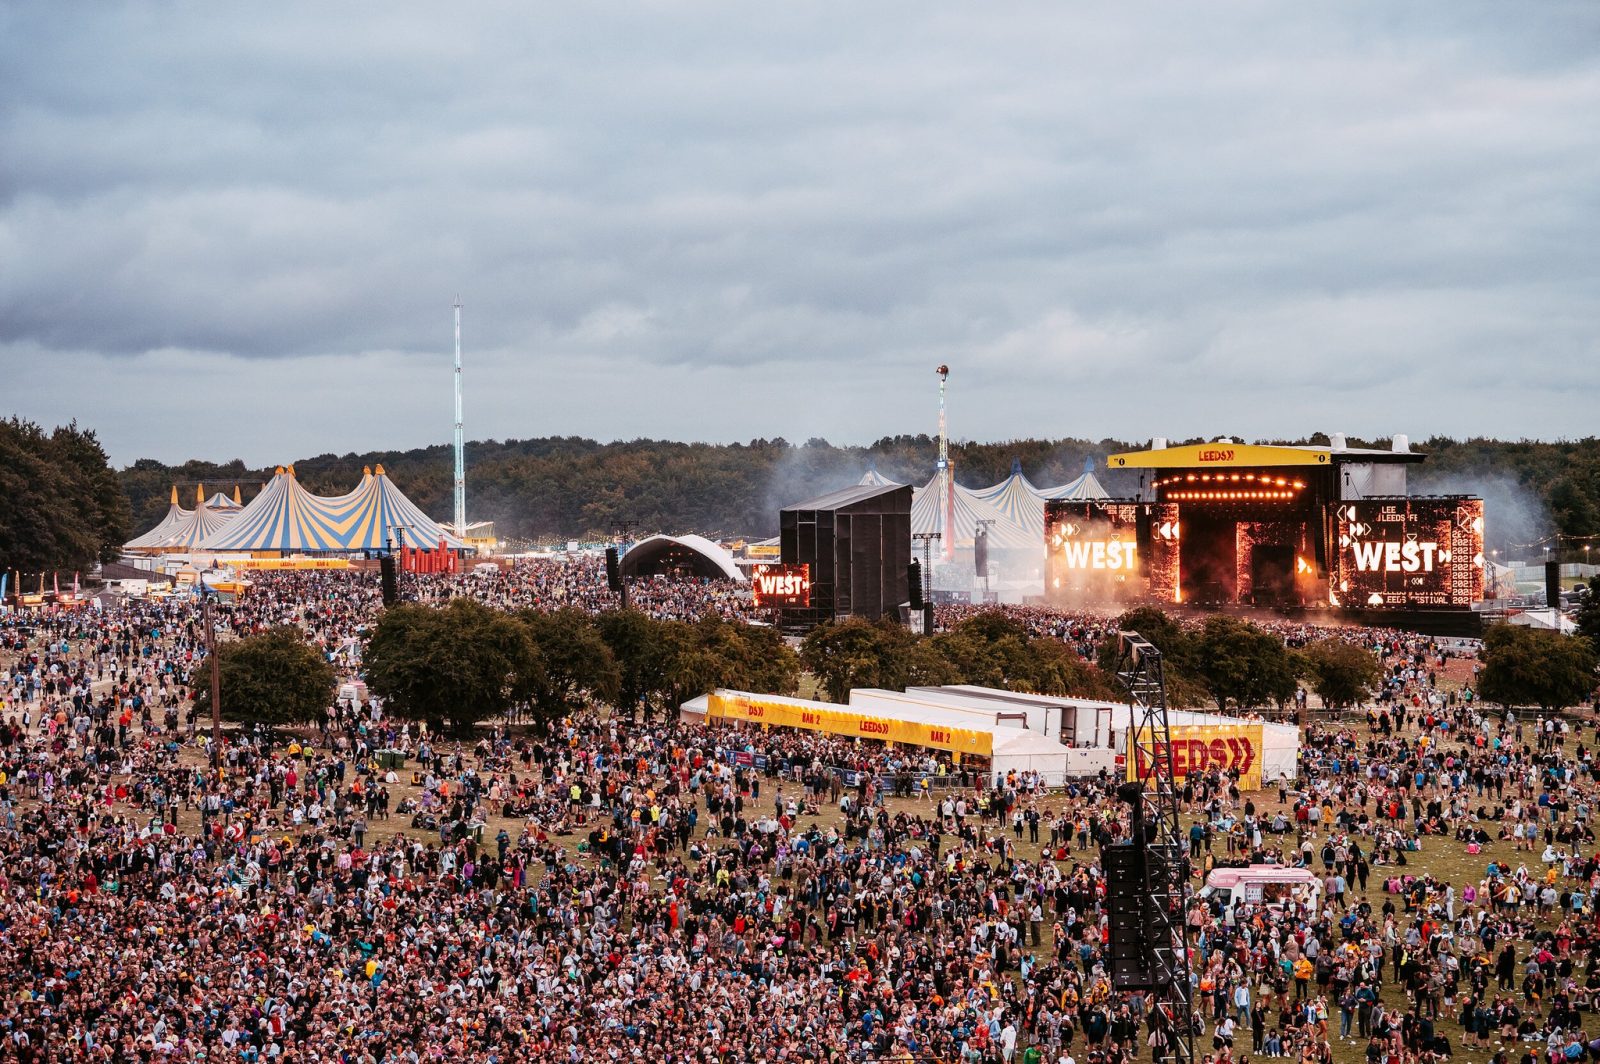 Last chance to join us at Reading and Leeds Festival 2023!